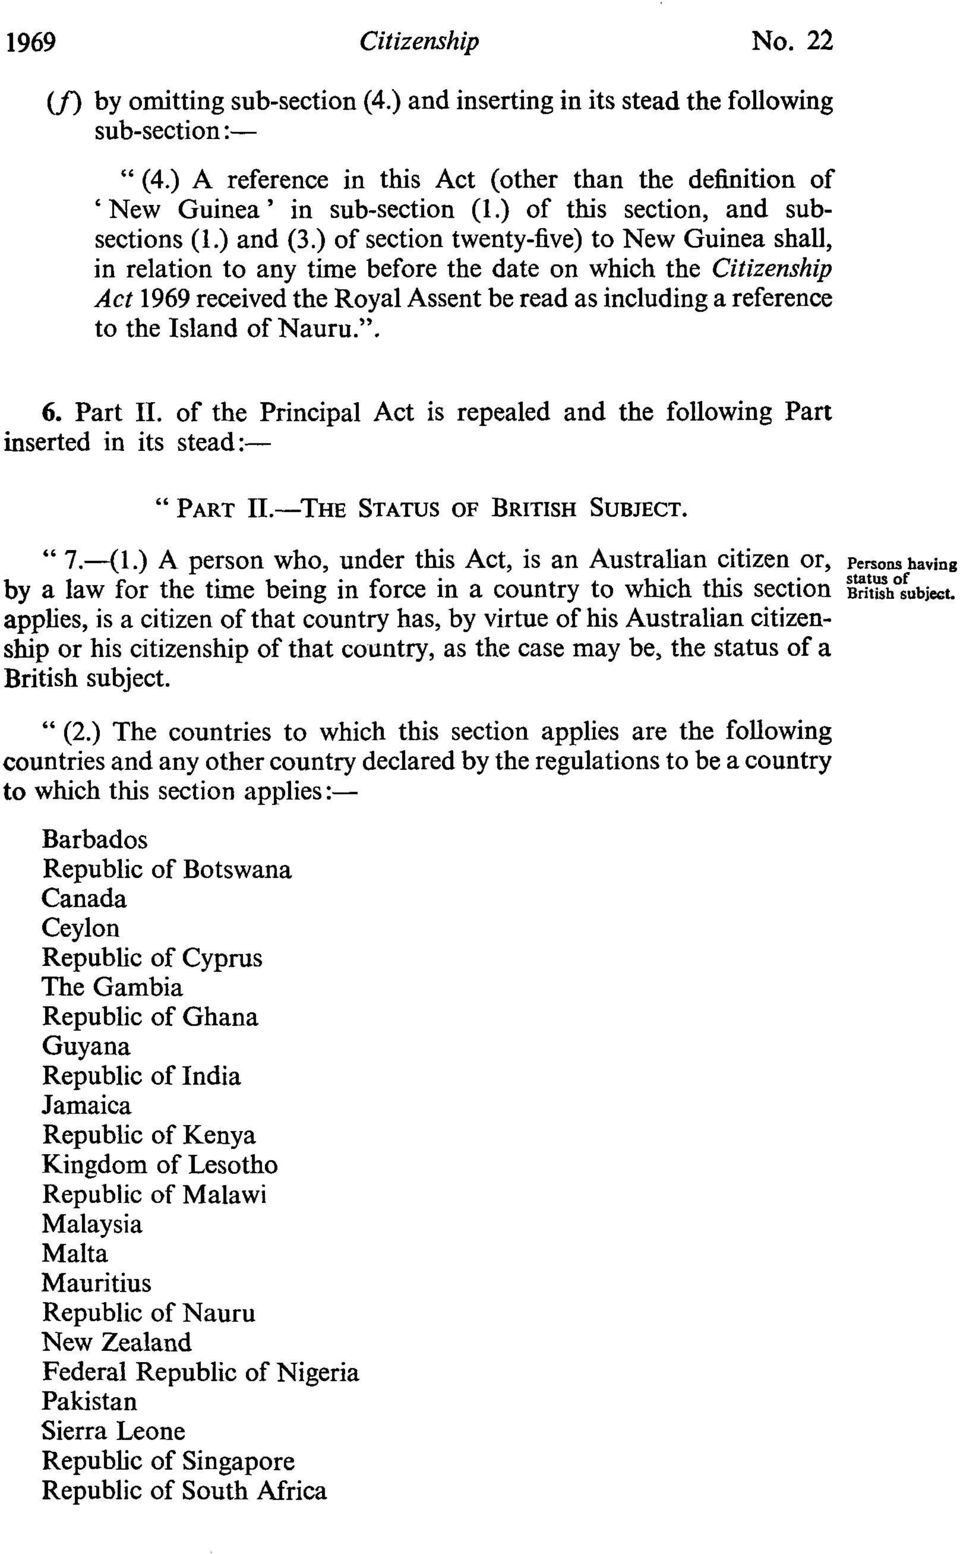 ) of section twenty-five) to New Guinea shall, in relation to any time before the date on which the Citizenship Act 1969 received the Royal Assent be read as including a reference to the Island of